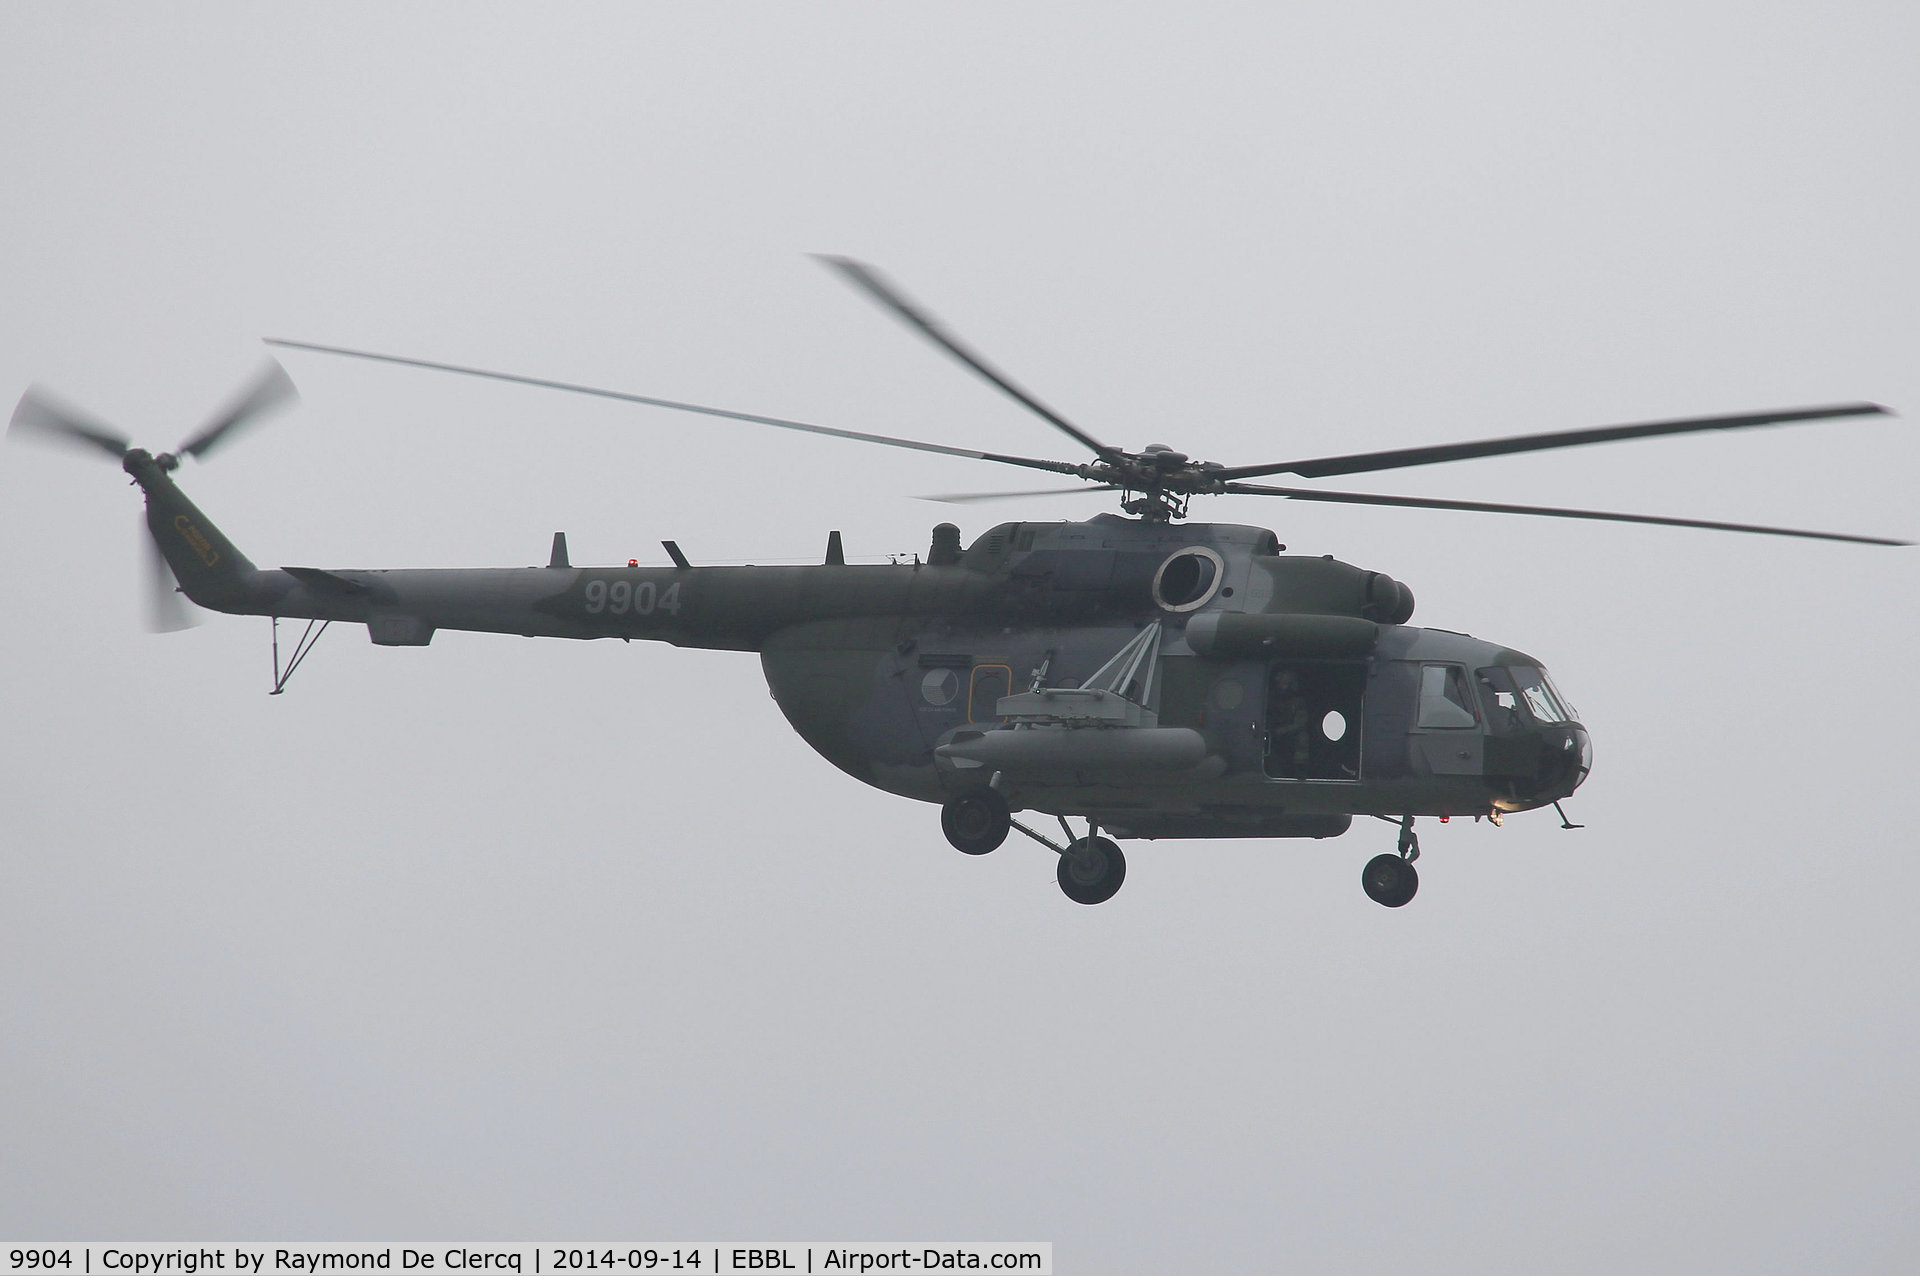 9904, Mil Mi-171Sh Hip C/N 59489619904, Flying display in the cloudy morning at EBBL.